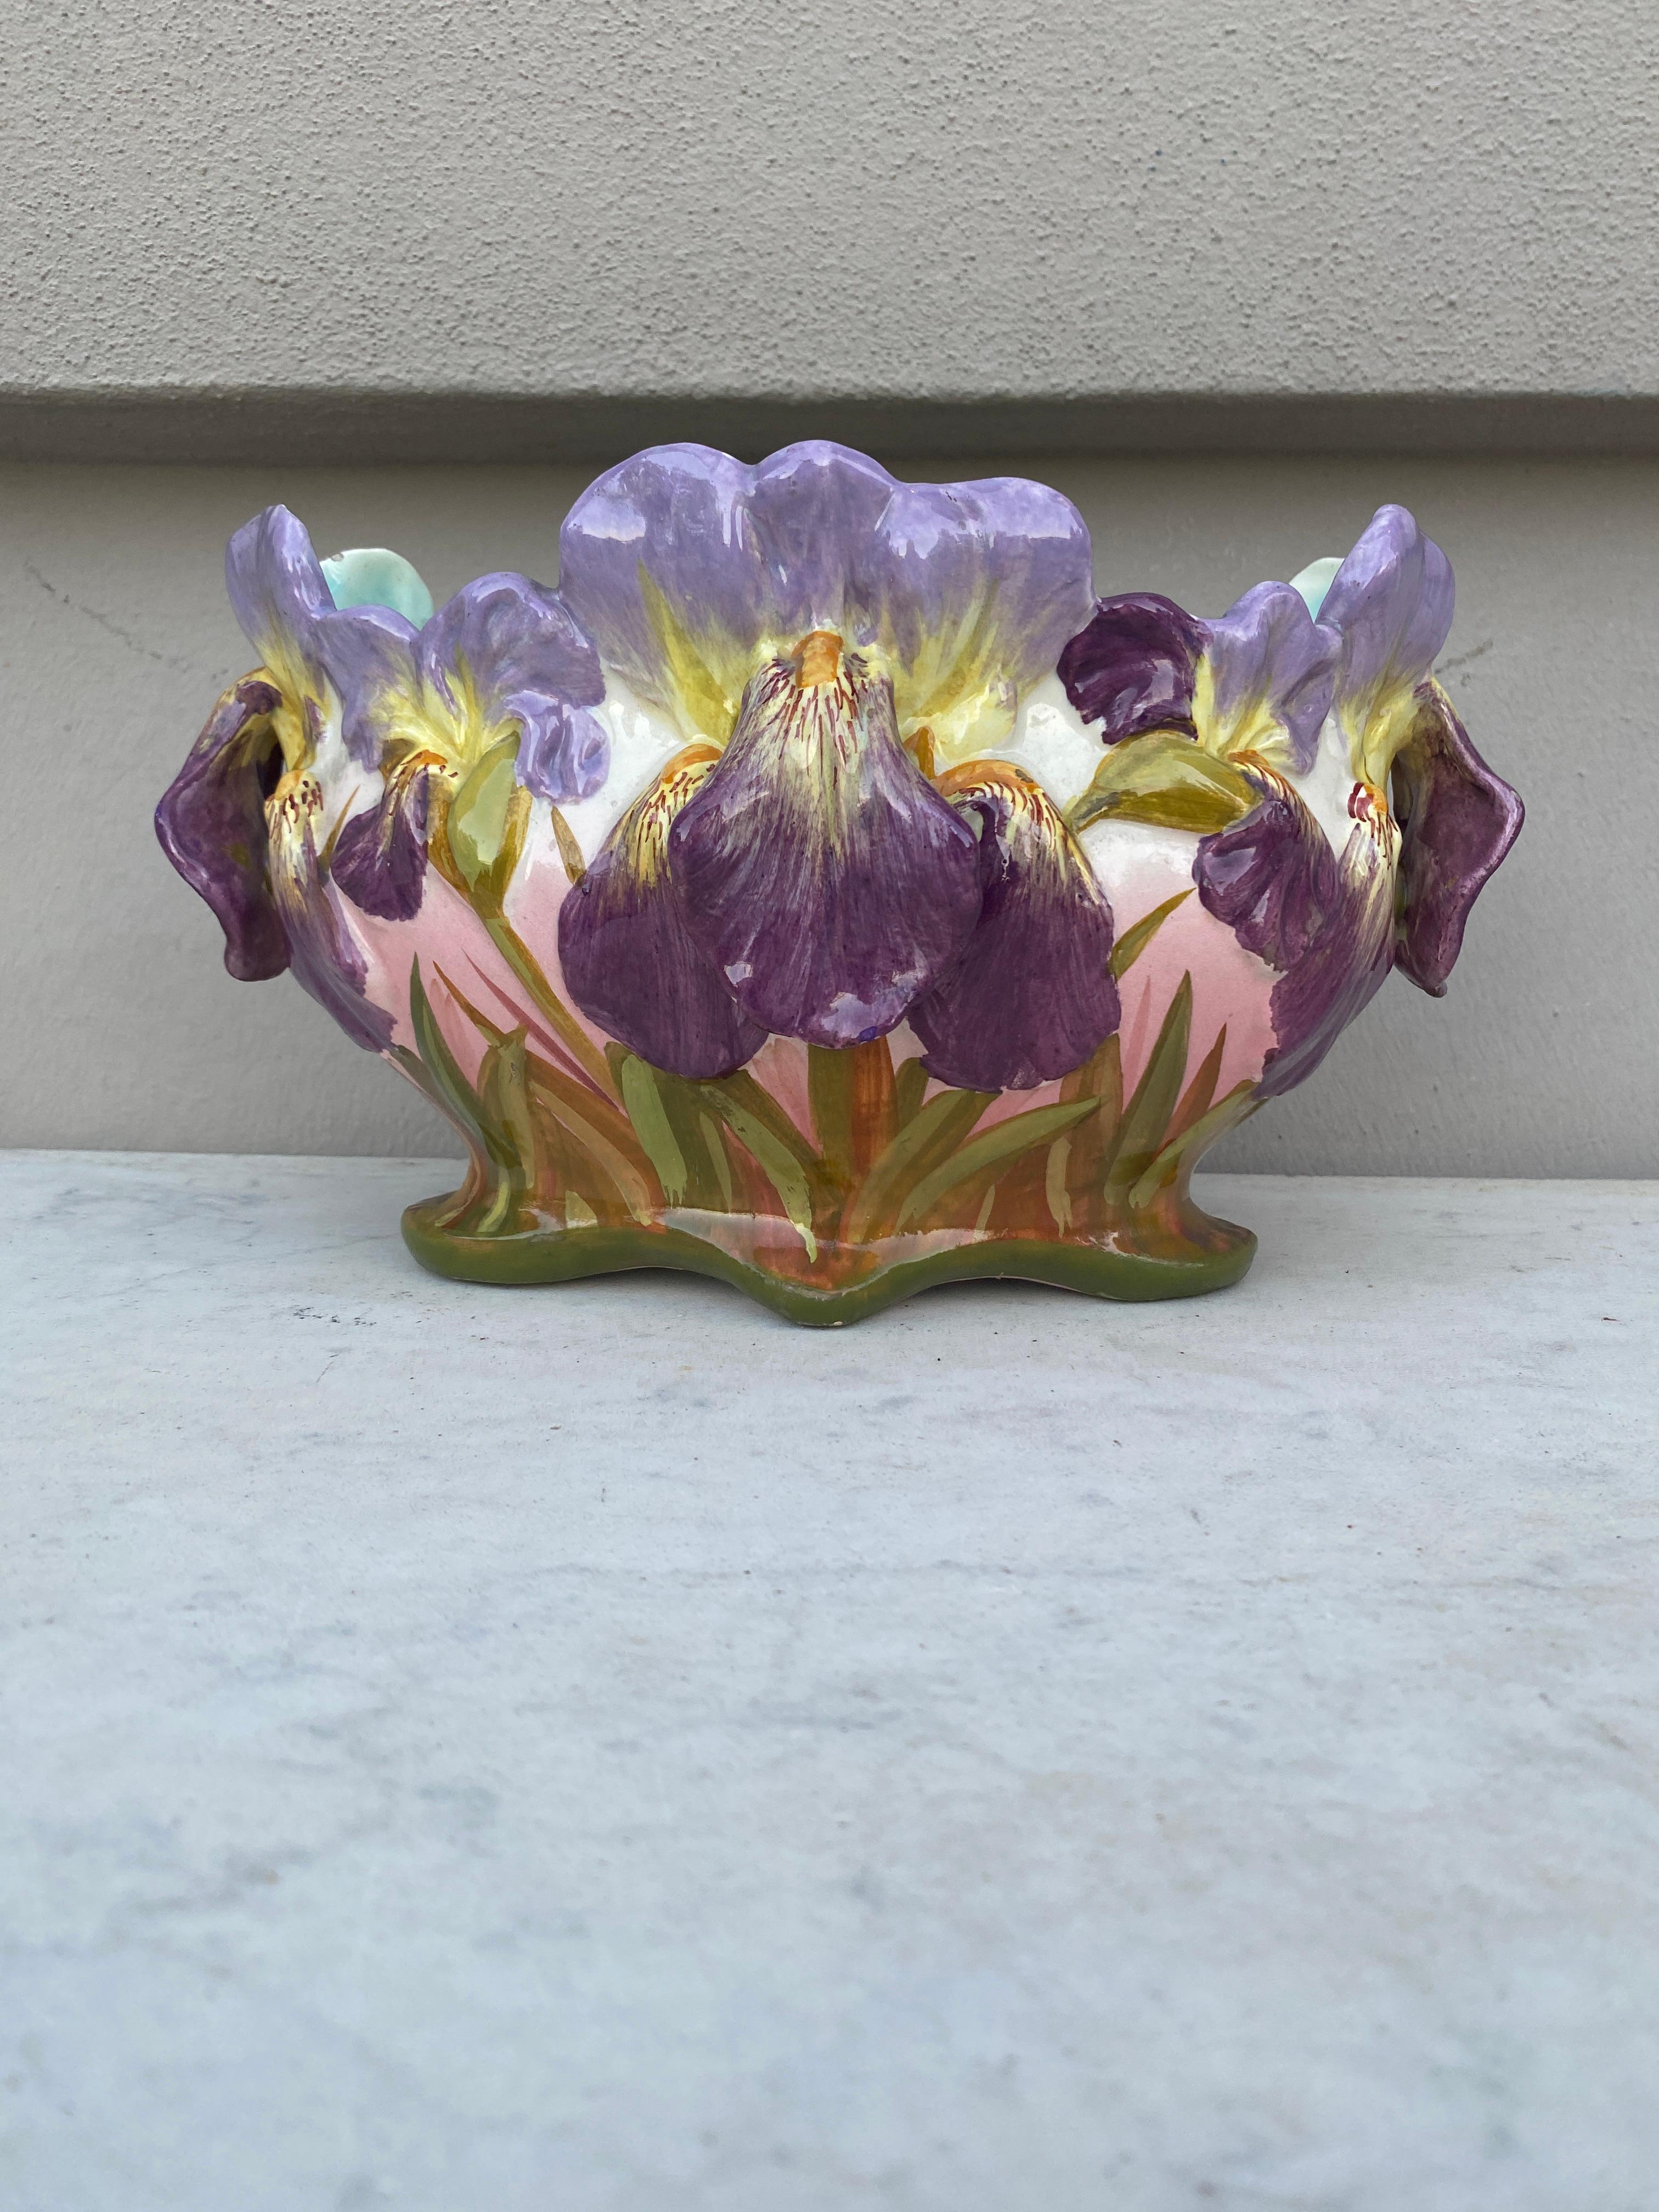 Small purple French Majolica iris oval jardiniere signed Jerome Massier Fils, circa 1900.
The Massier family are known for the quality of their unique enamels and paintings. They produced an incredible whole range of flowers like iris, roses,